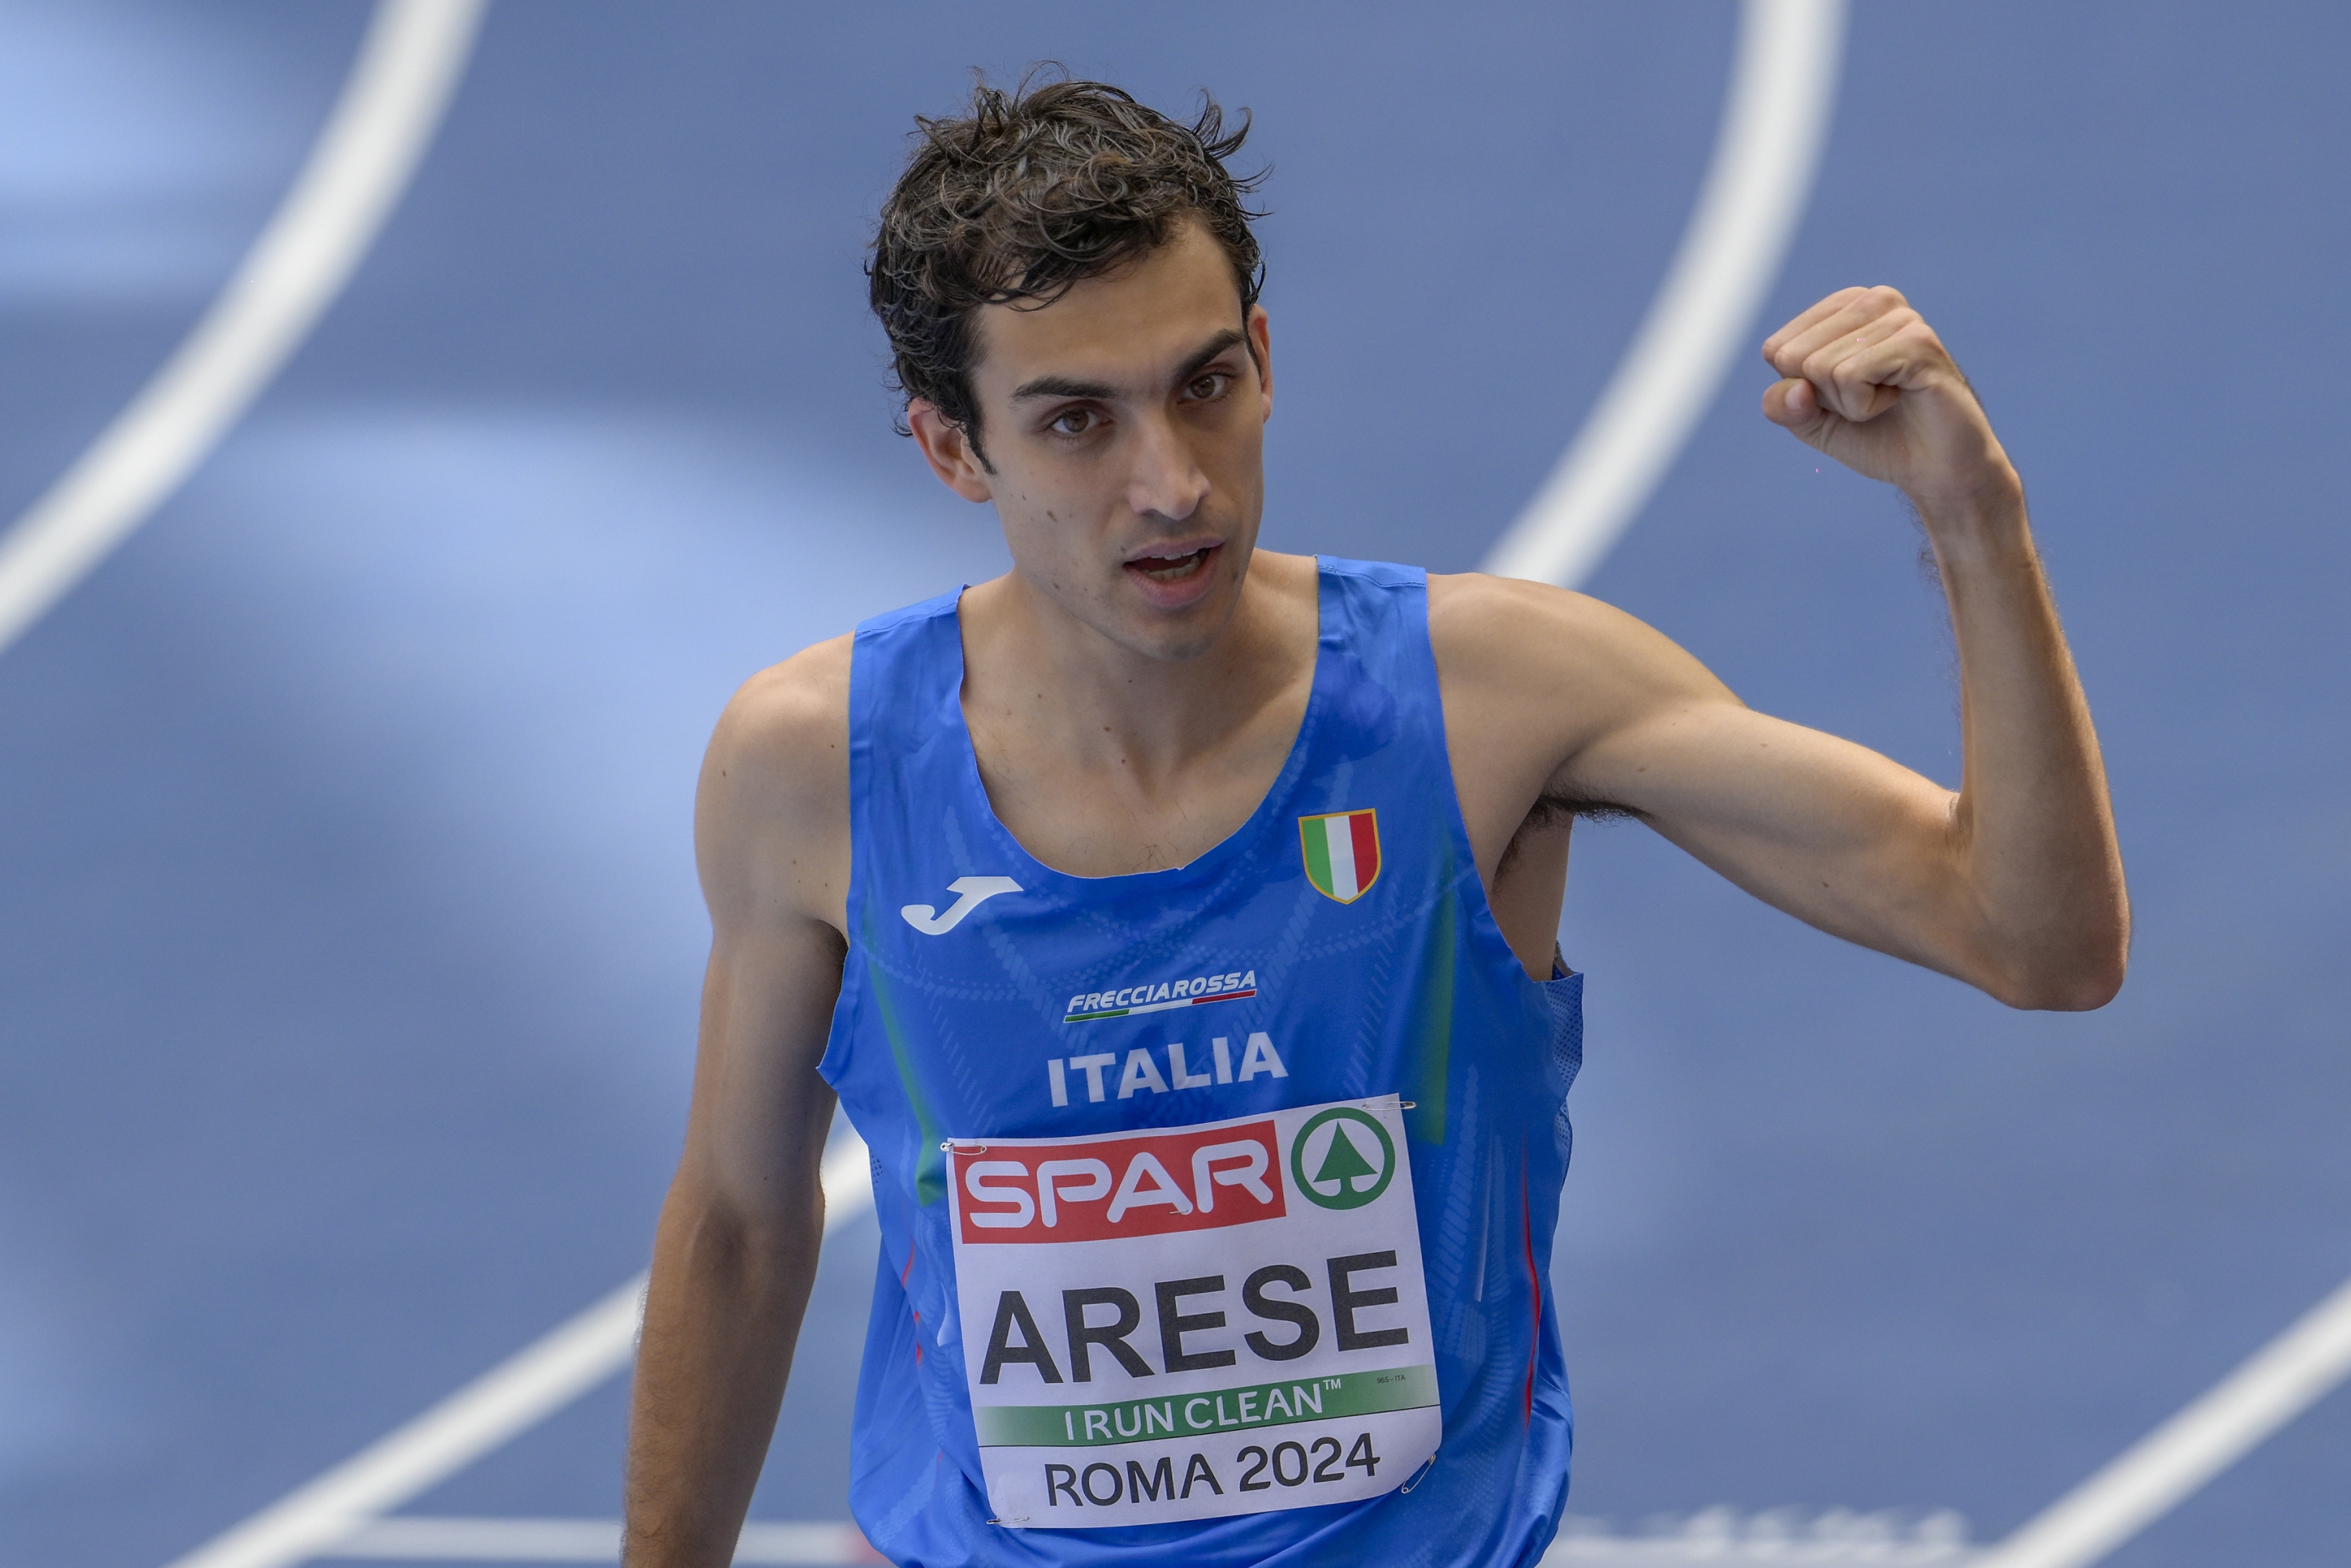 Italy?s Pietro Arese competes 1500m Men during the 26th edition of Rome 2024 European Athletics Championships at the Olympic Stadium in Rome, Italy - Monday, June 10, 2024 - Sport, Athletics (Photo by Fabrizio Corradetti/LaPresse)